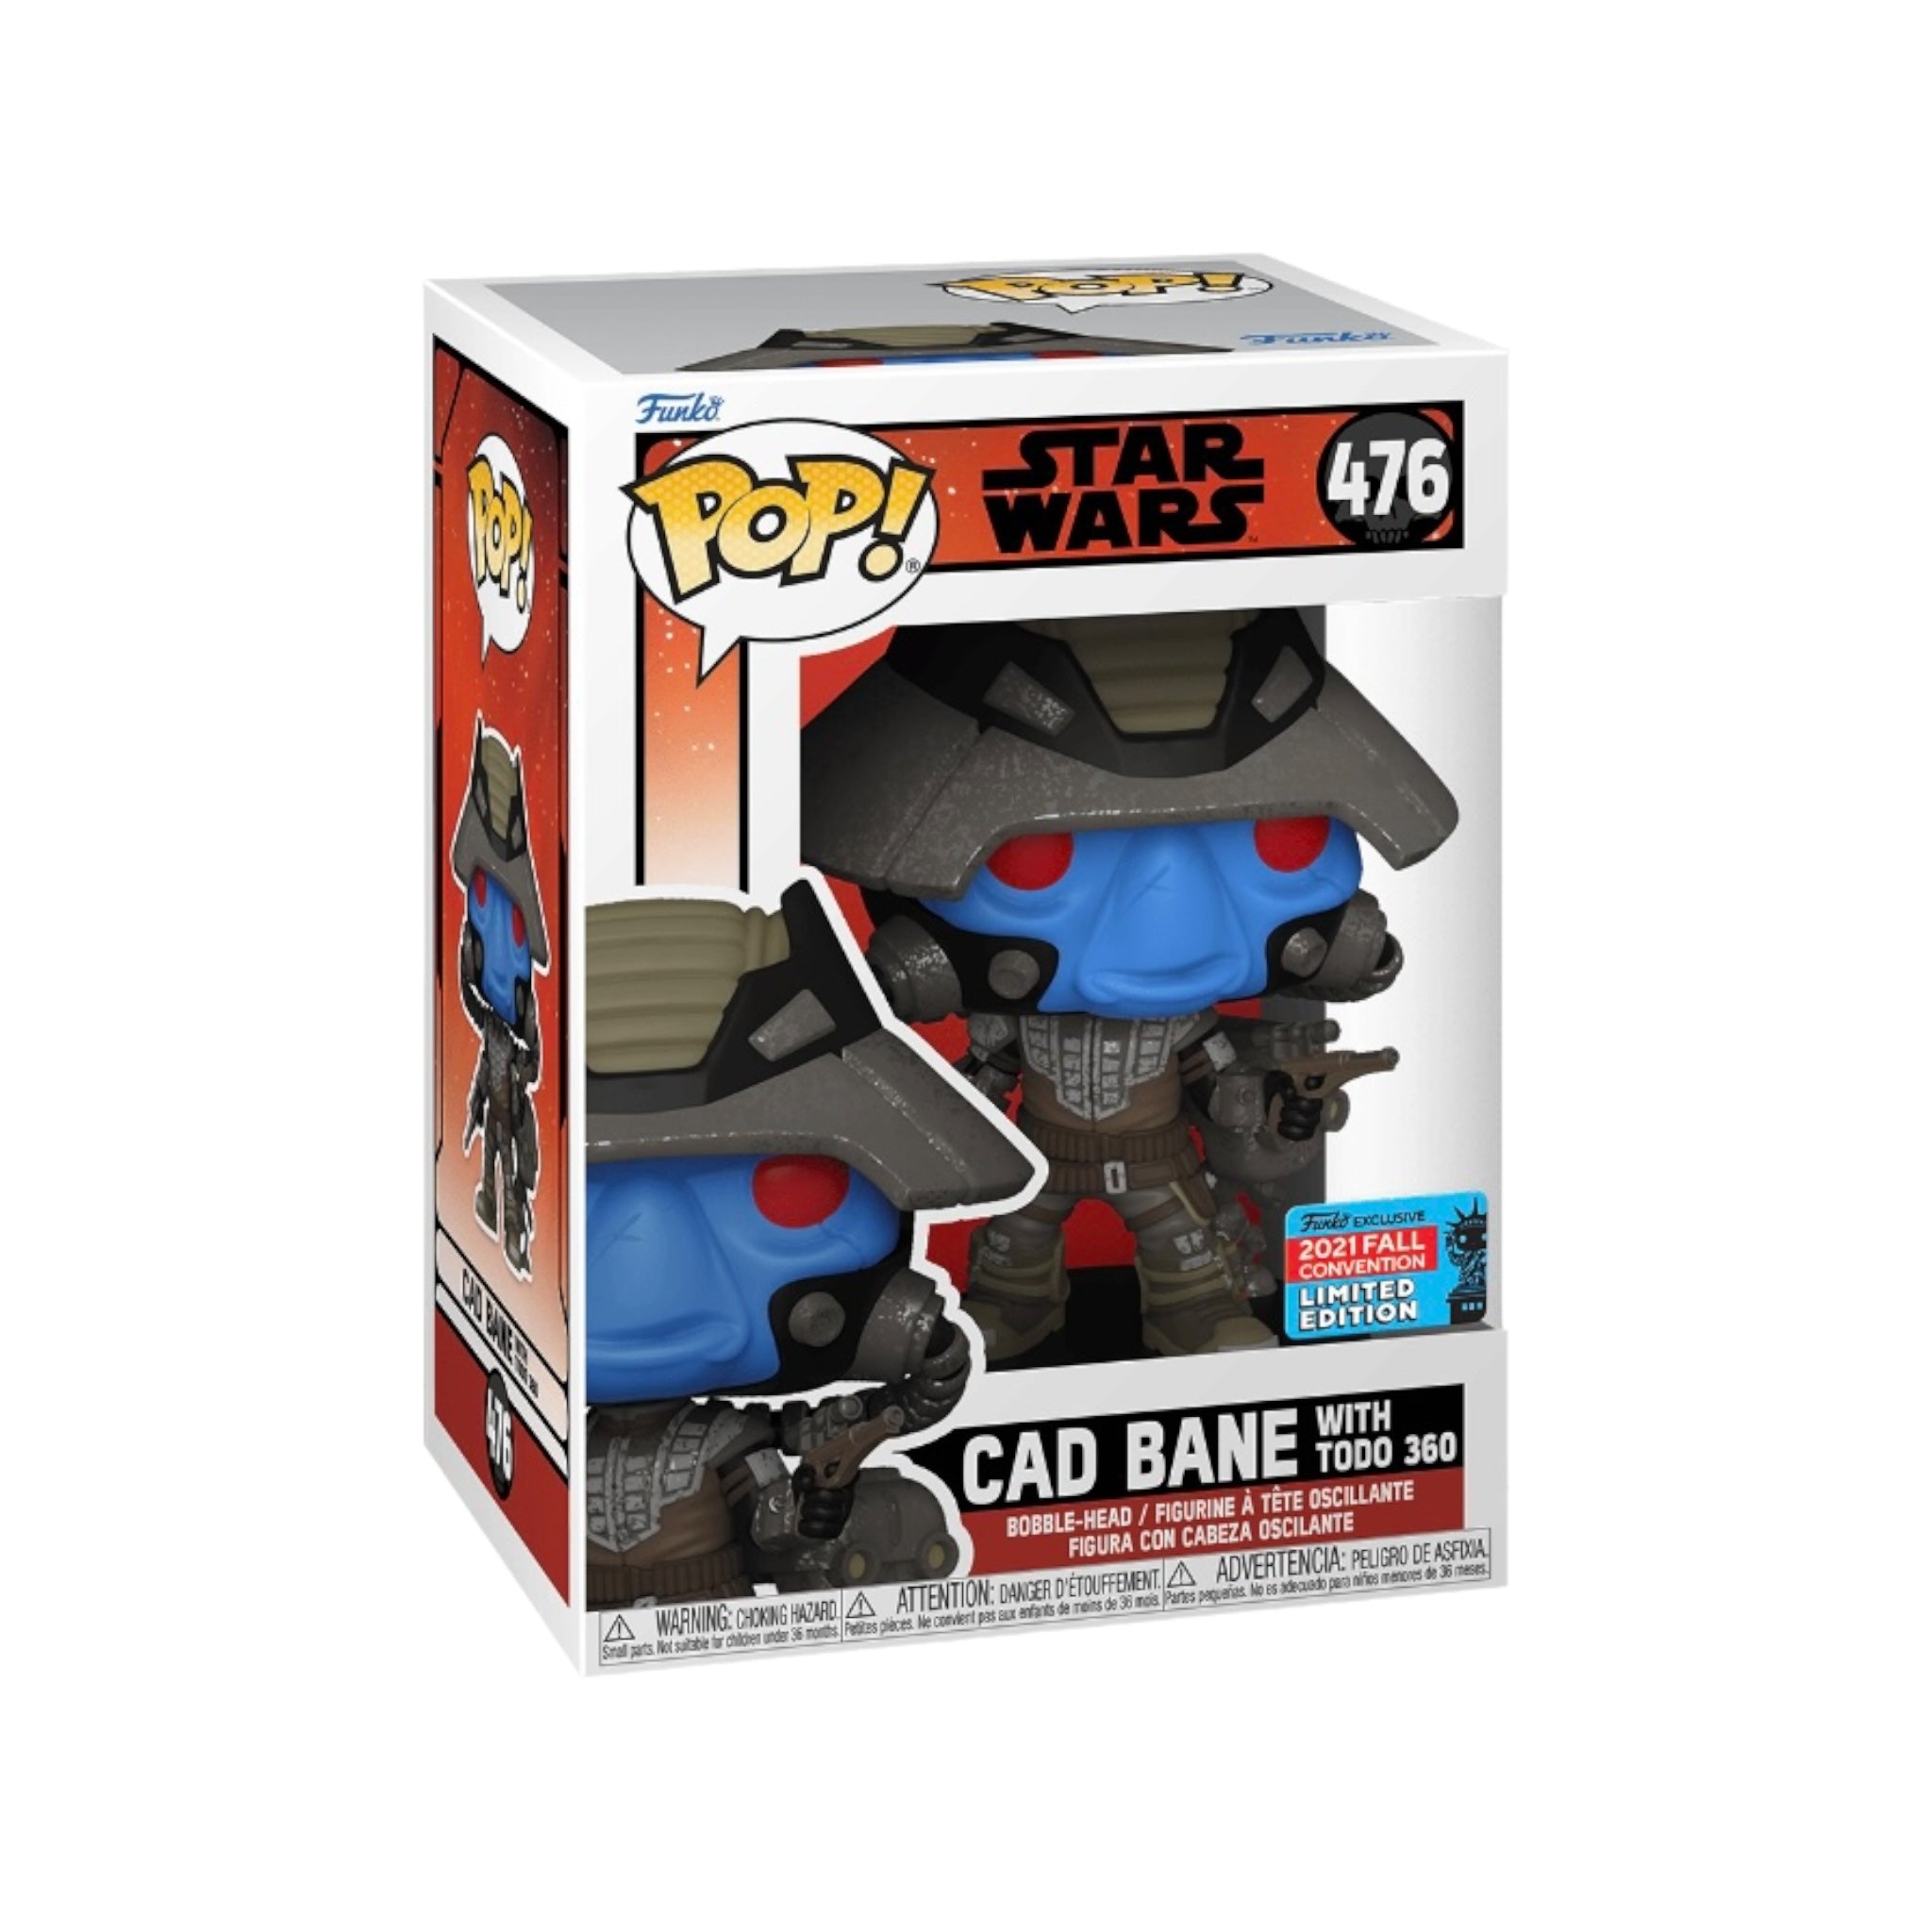 Cad Bane with Todo 360 #476 Funko Pop! -  Star Wars: The Bad Batch - NYCC 2021 Shared Exclusive